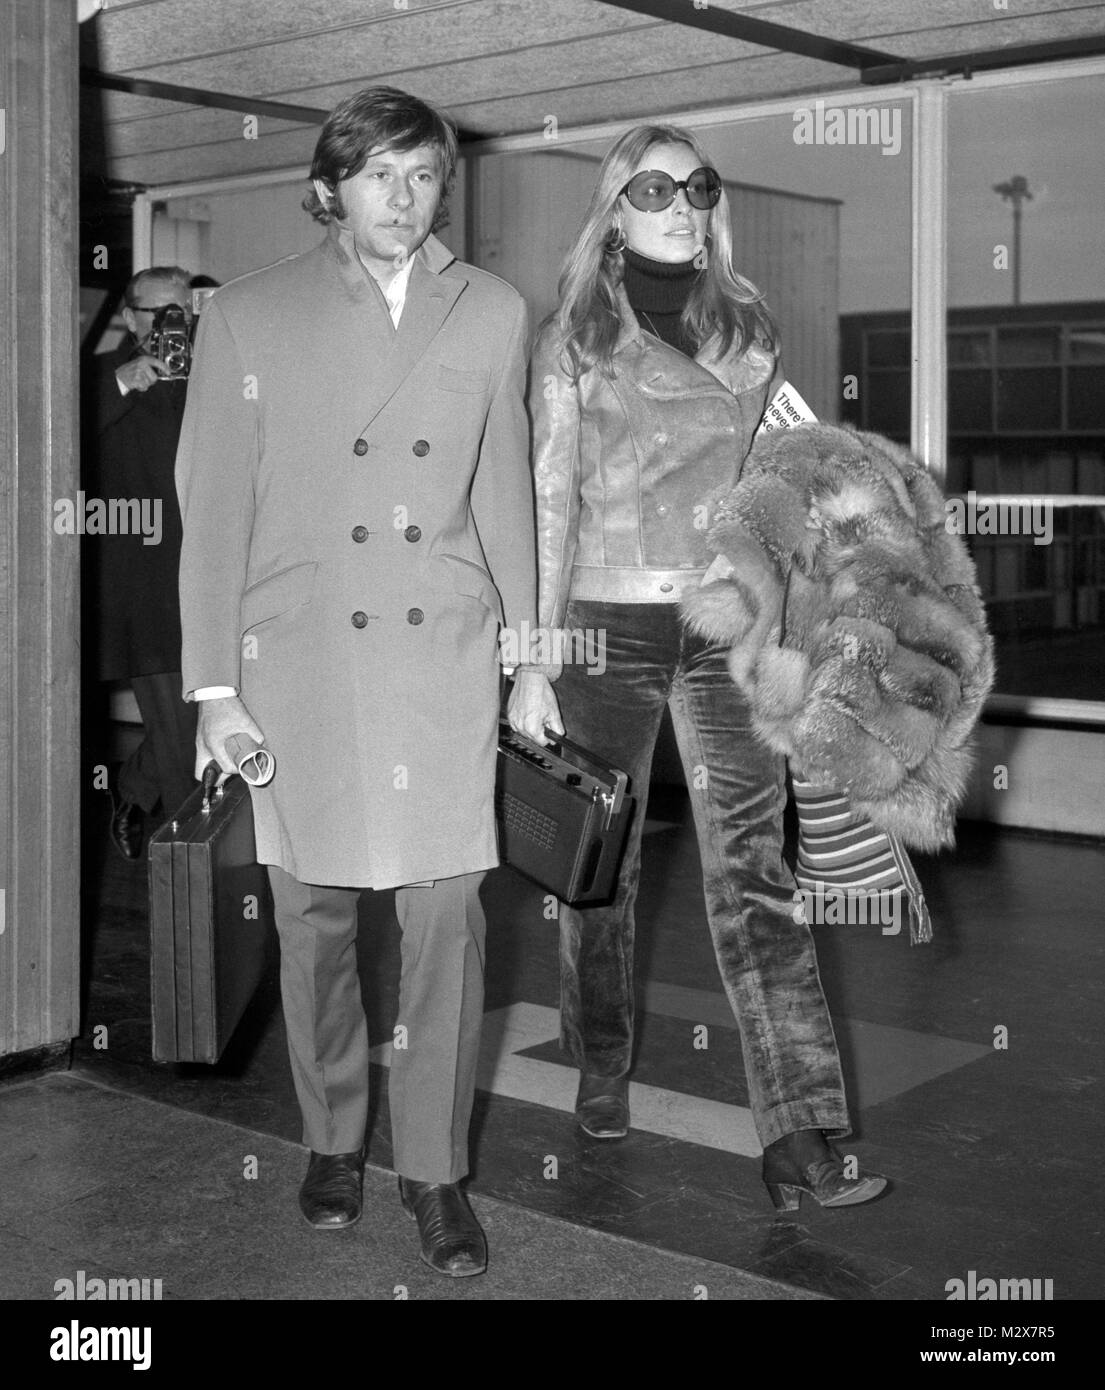 In trouser suit and carrying a fur coat, American-born actress Sharon Tate arrives with her husband Roman Polanski, at Heathrow Airport, London, from Venice to attend the premiere of her film 'Rosemary's Baby'. Stock Photo